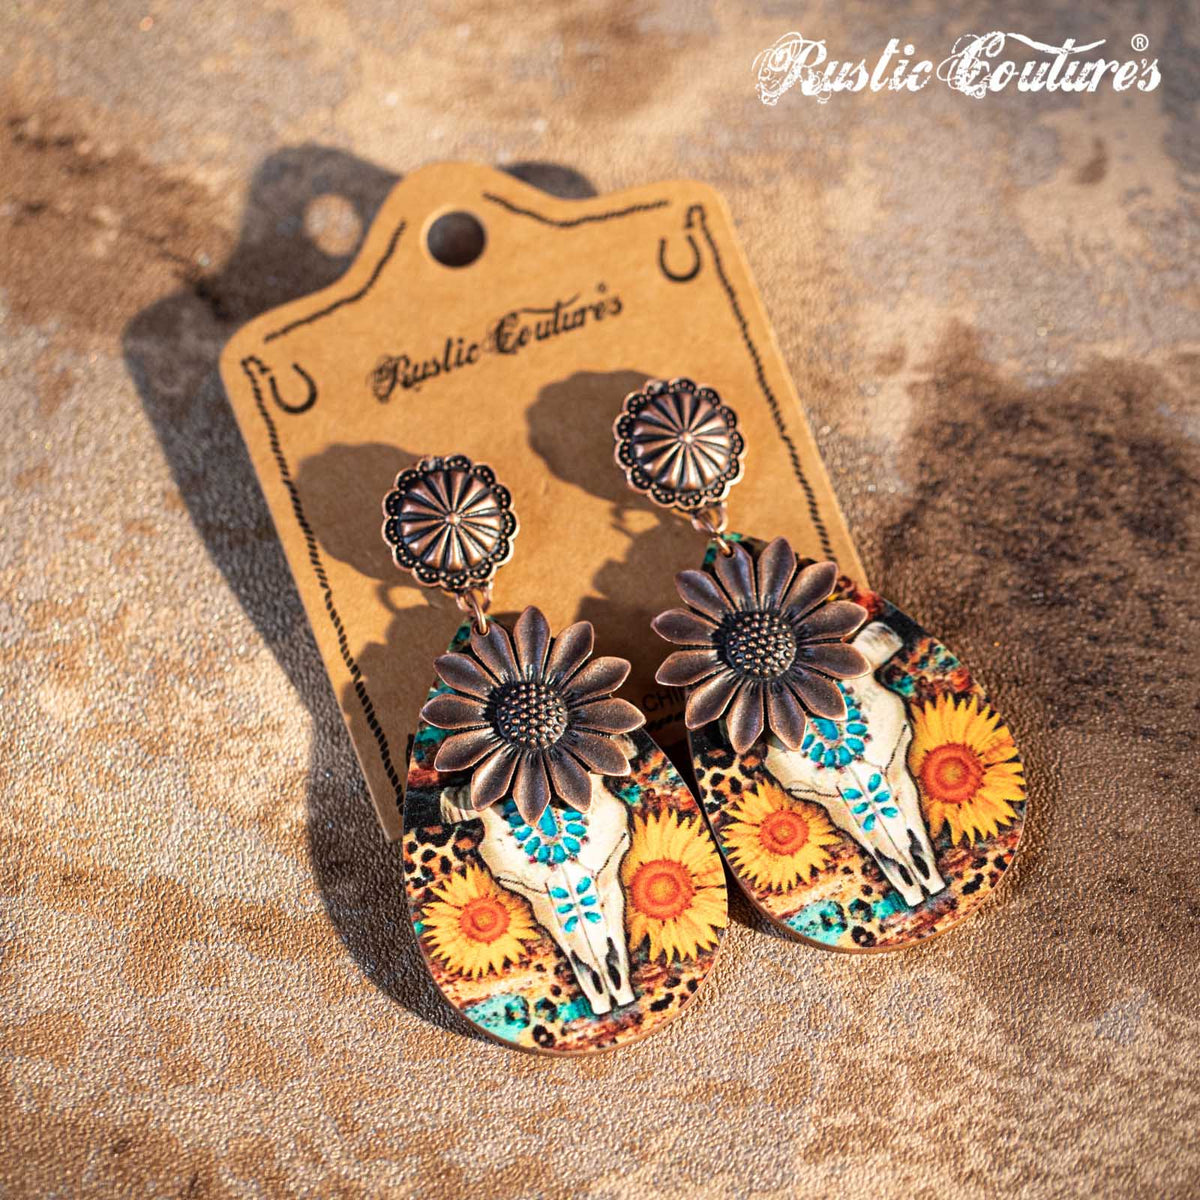 Rustic Couture's Sunflower with Skeleton Ram Head Wooden Dangling Earring